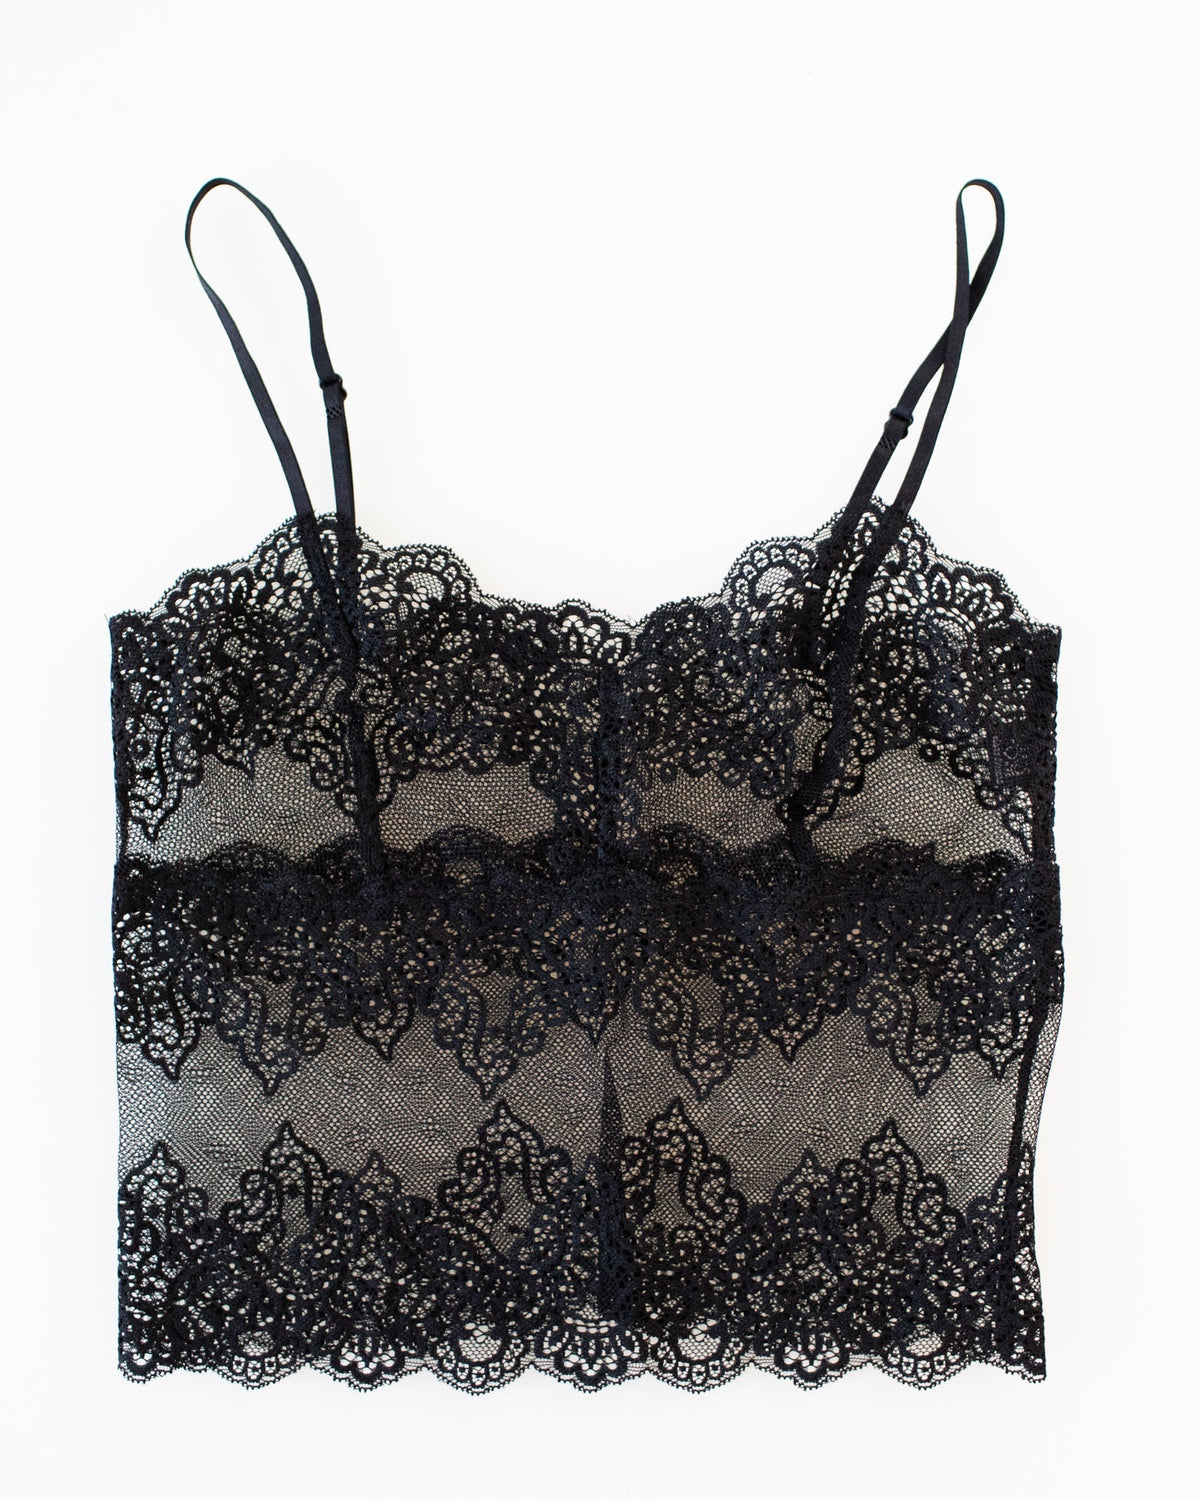 Only Hearts Lingerie SF w/ Lace Cami in Black